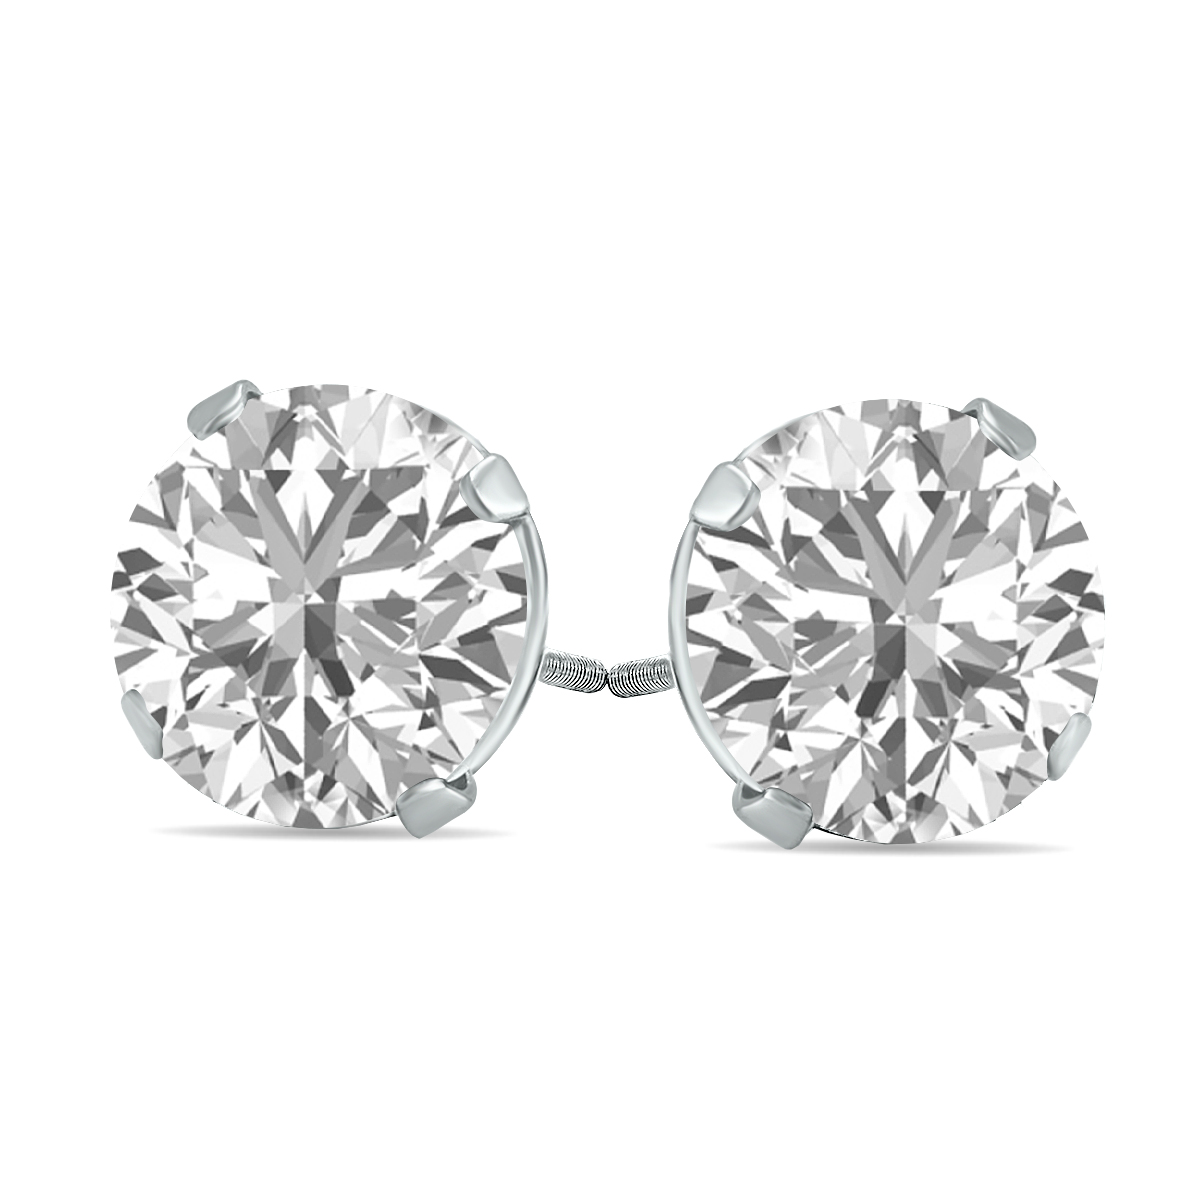 Image of IGI Certified Lab Grown 2 1/4 Carat Total Weight Diamond Solitaire Earrings in 14K White Gold (J Color SI2 Clarity)